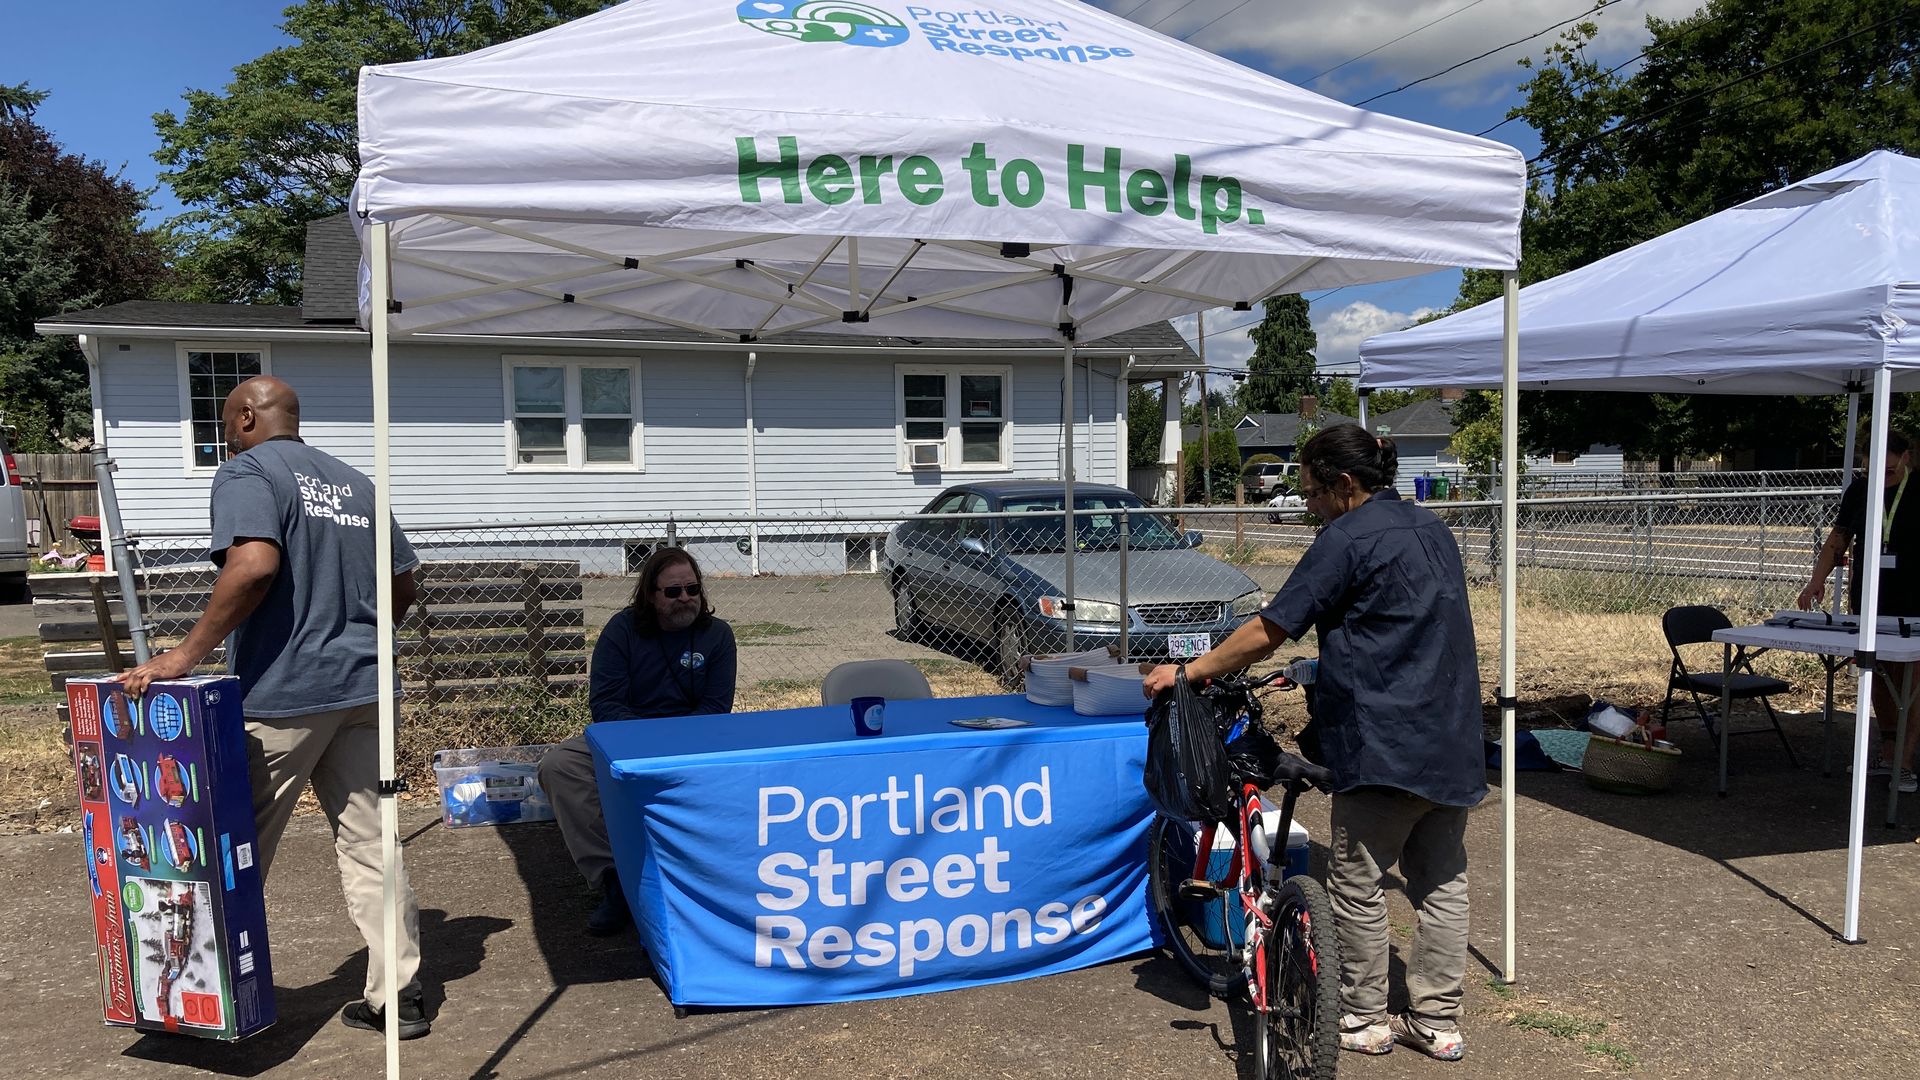 A man site at a table draped in a blue banner that reads Portland Street Response, under a white pop up tent that says Here to Help,  while a man with a bike reaches into. a cooler full of water bottles.